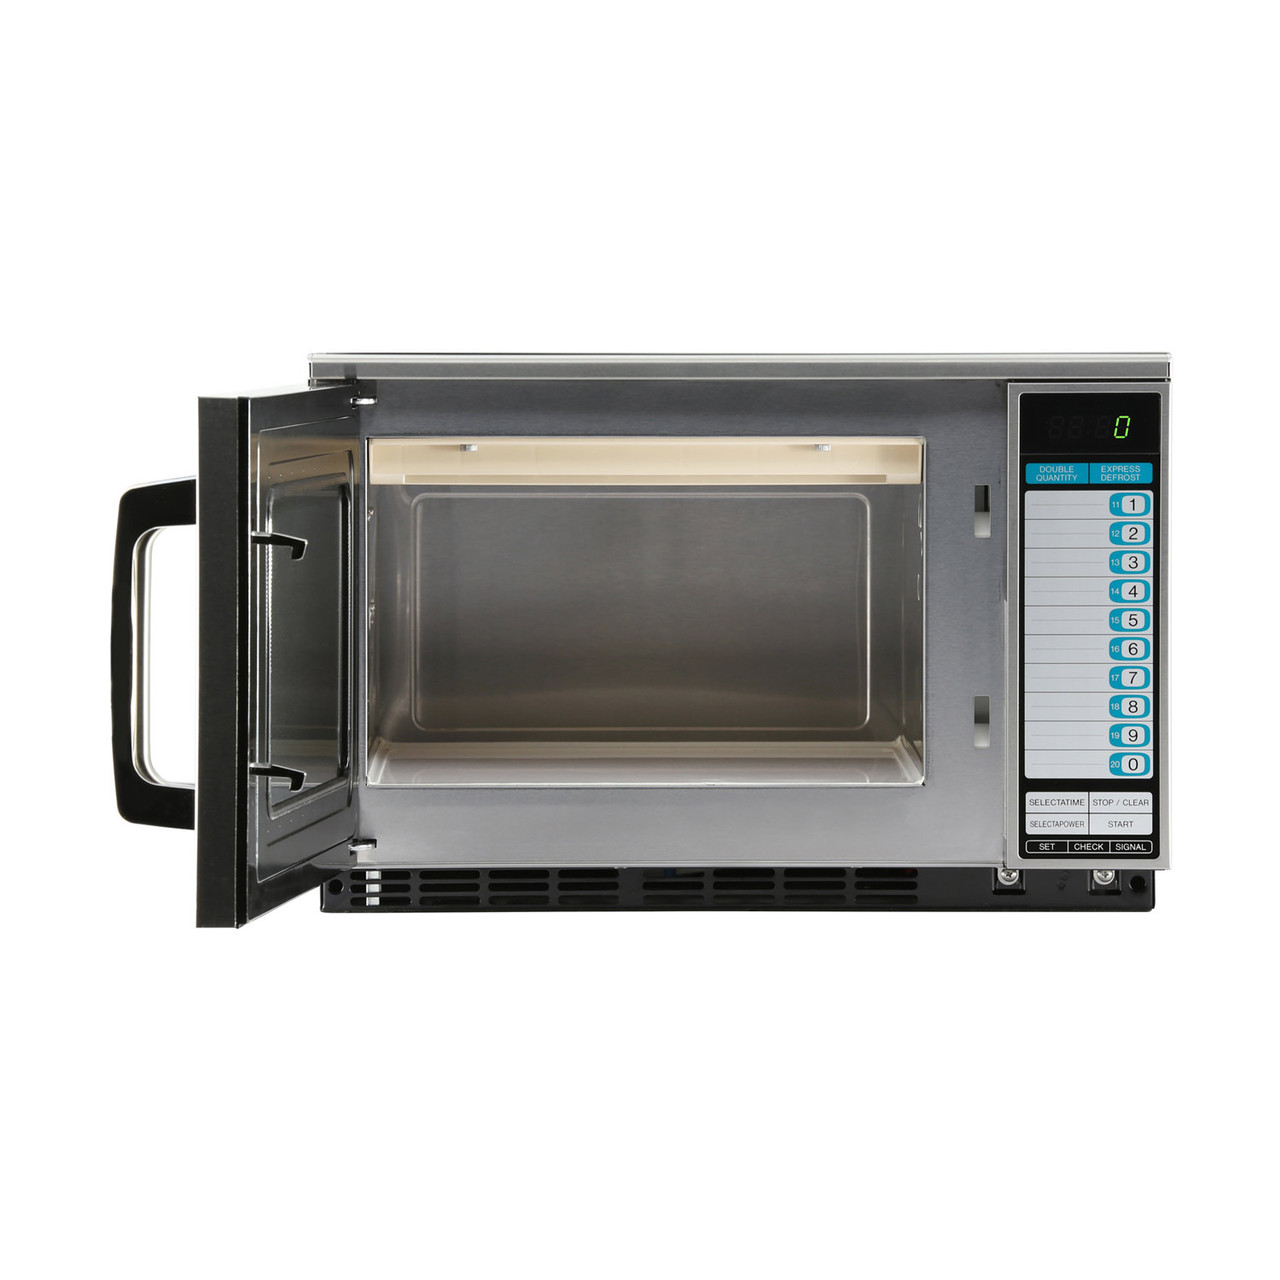 Sharp R25JTF Heavy-Duty Commercial Microwave Oven with 2100 Watts – front view with door open